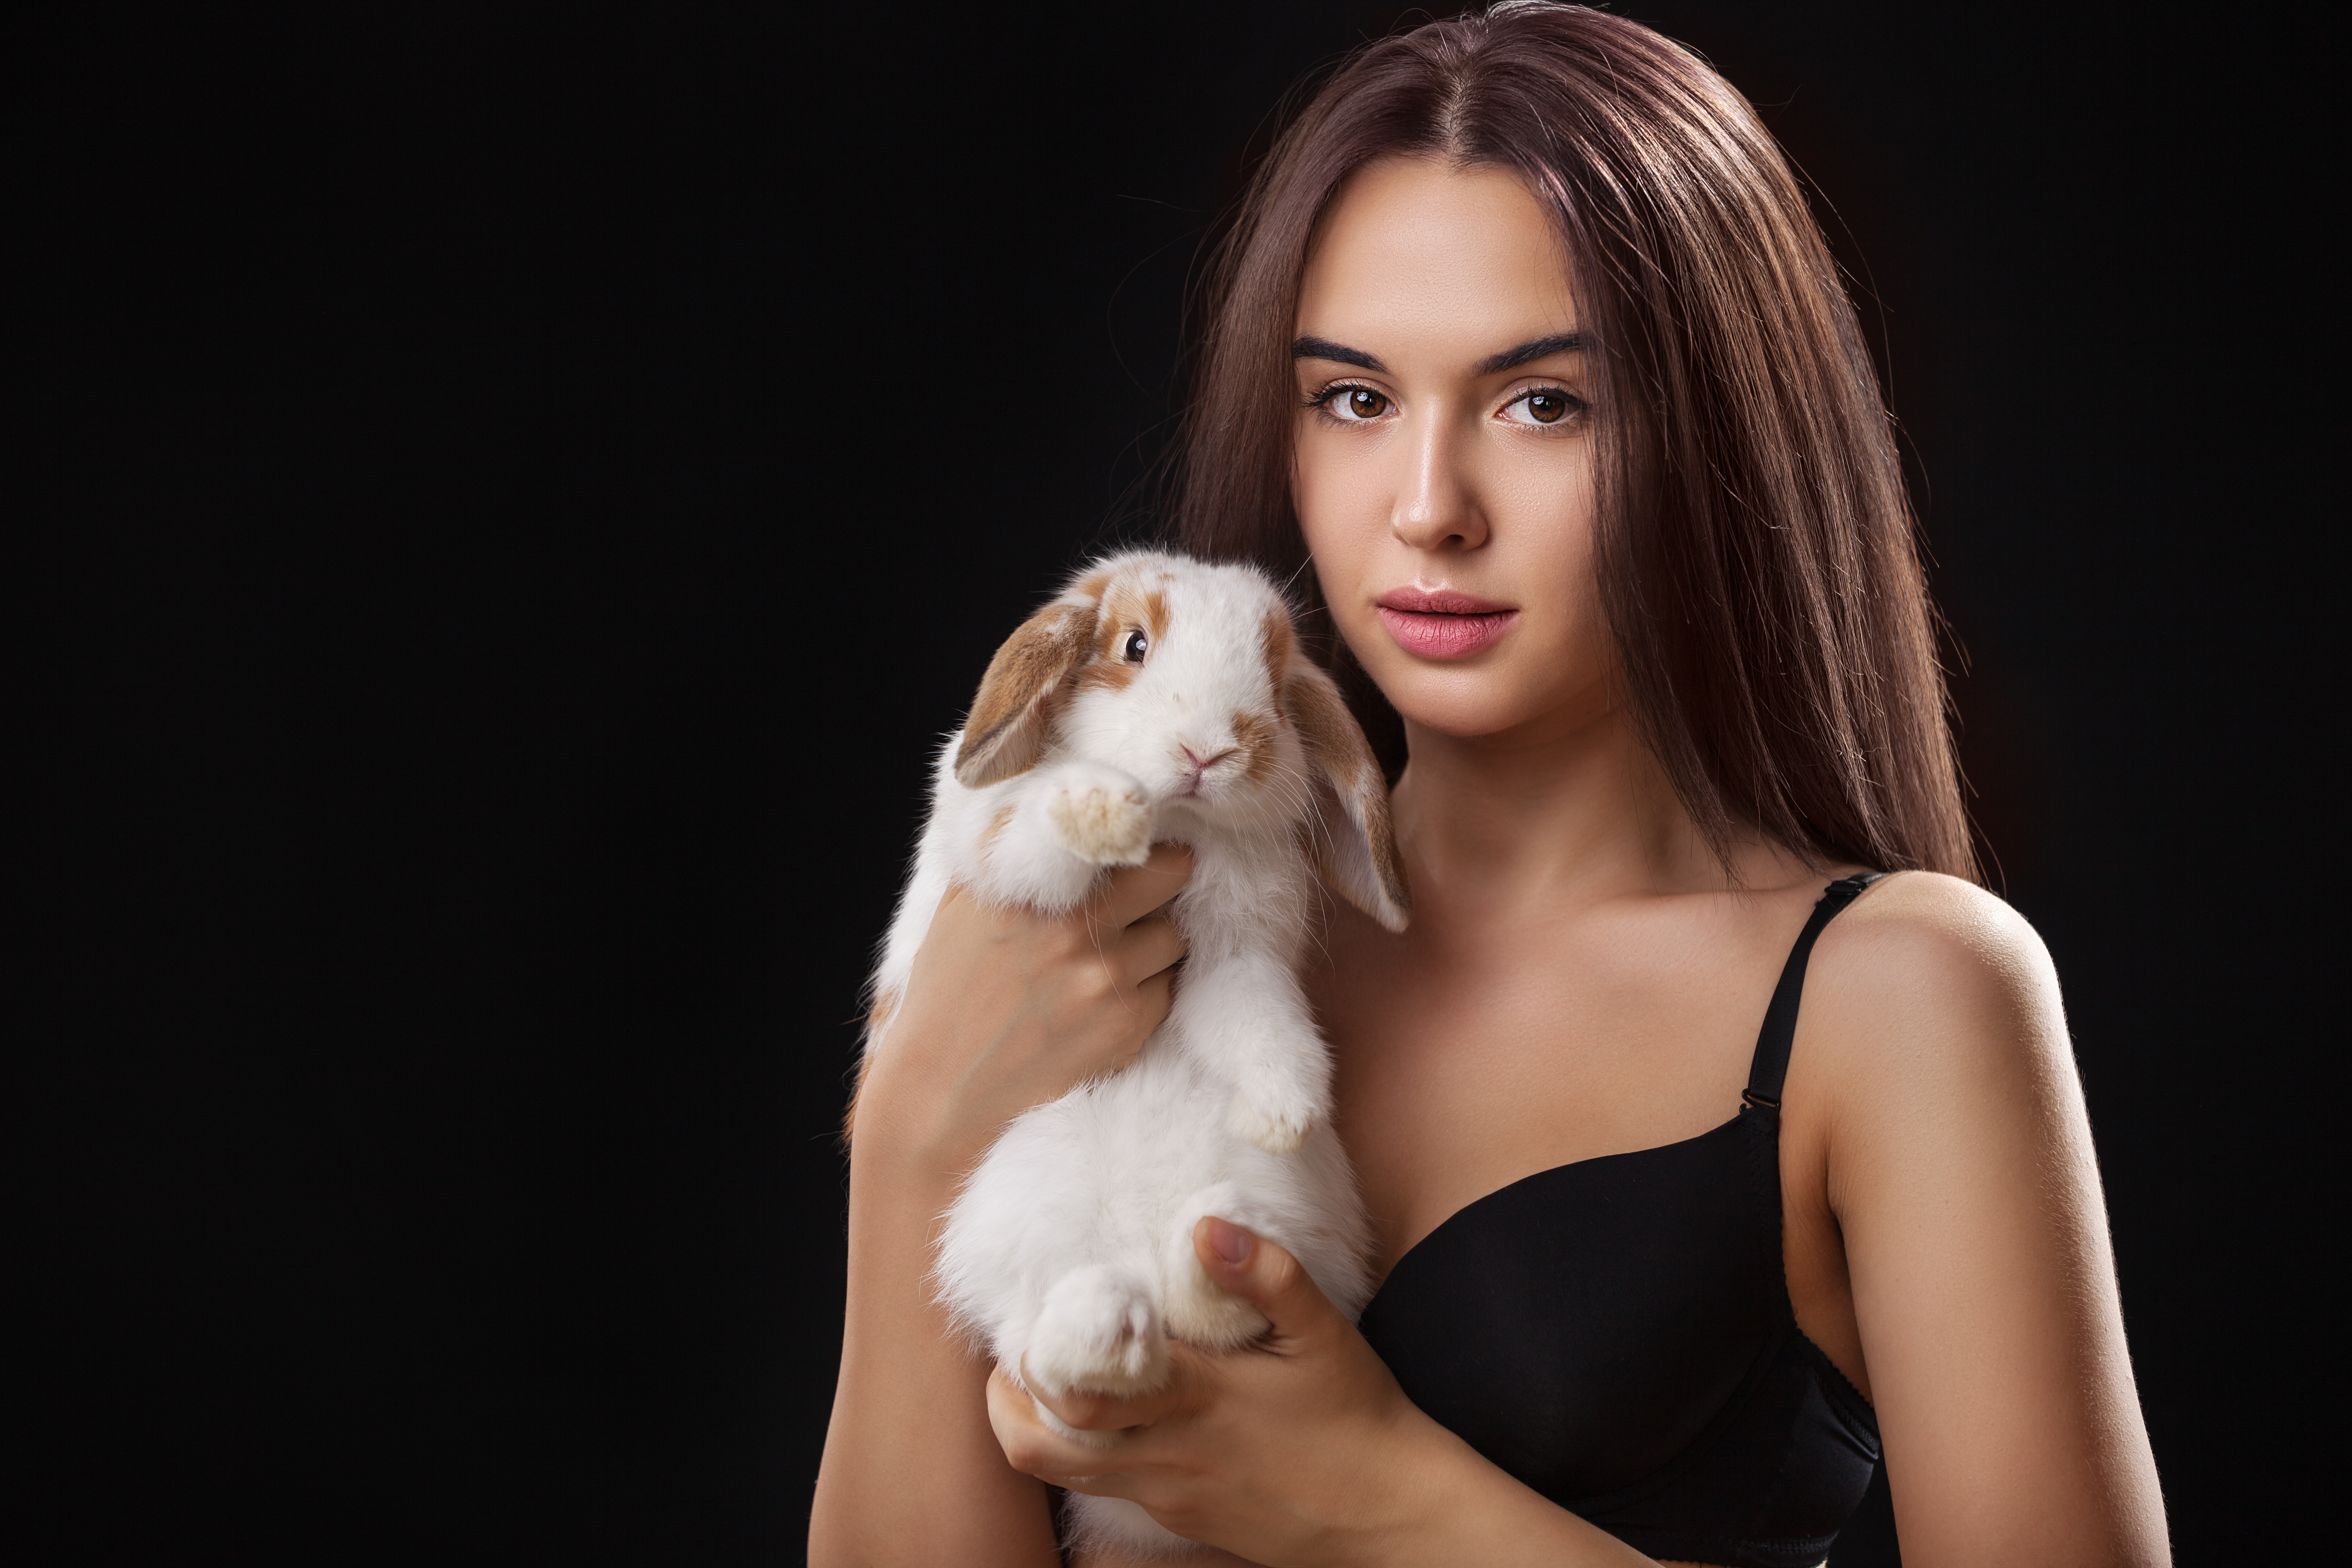 Rabbits may be key to revealing the secrets of the 'female orgasm' |  PinkNews